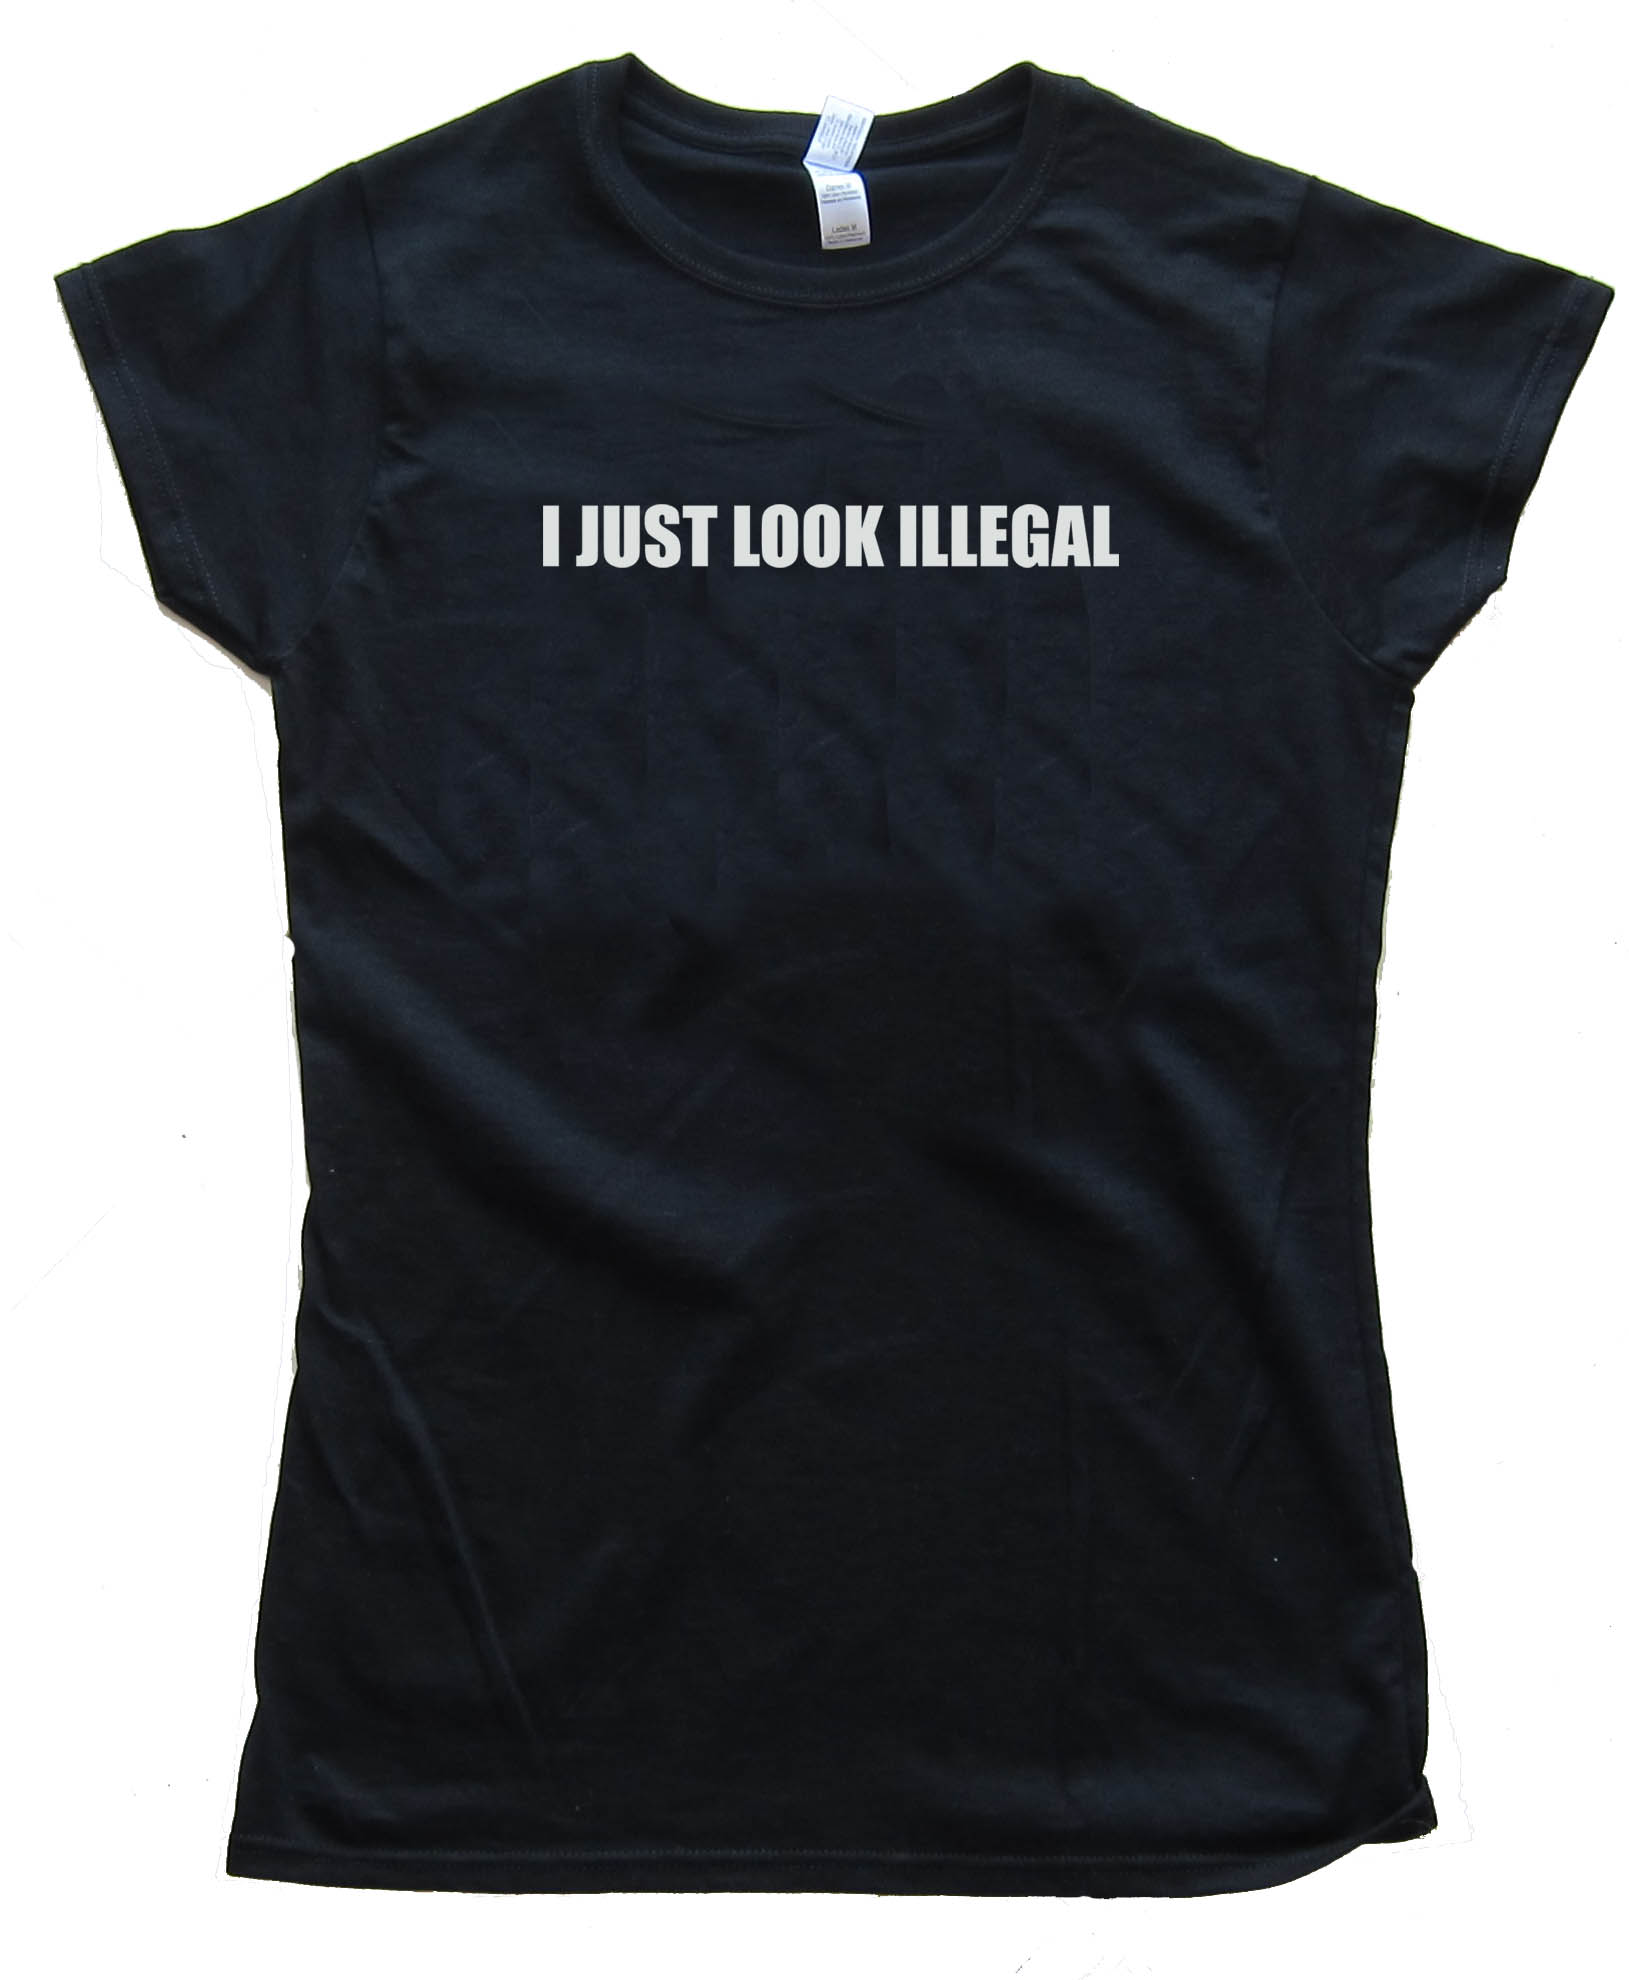 I Just Look Illegal Tee Shirt